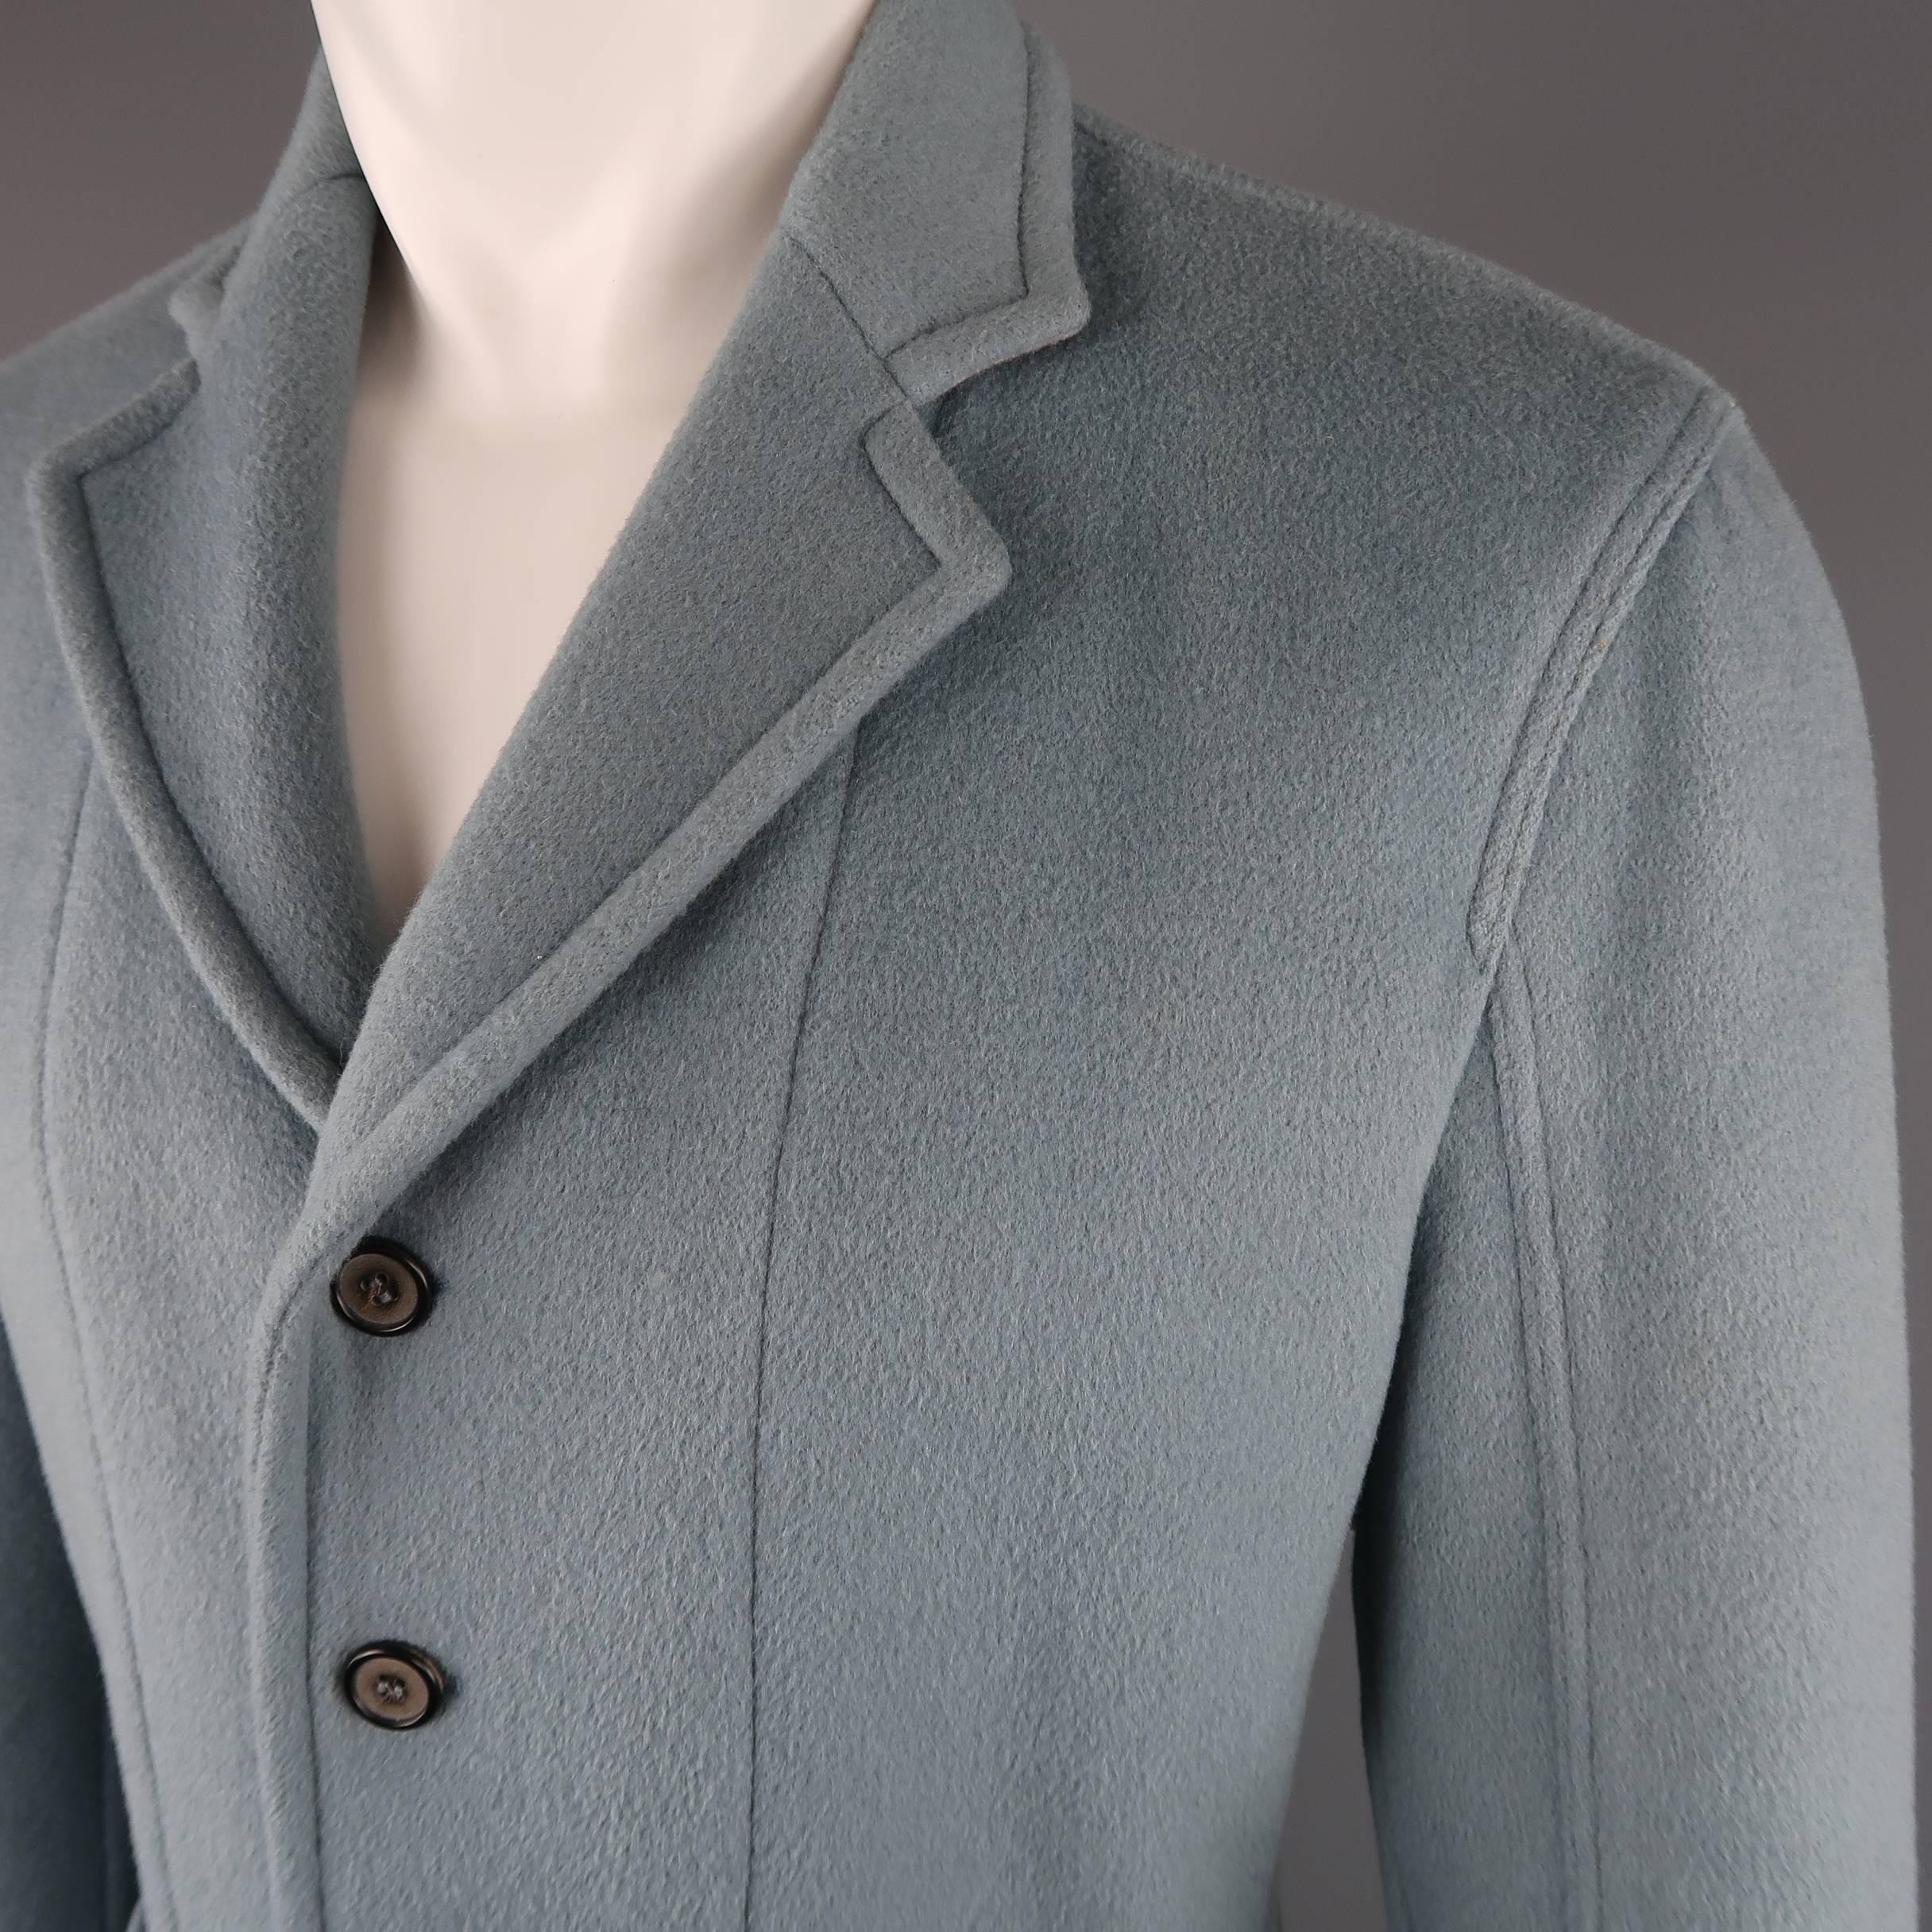 JOHN BARTLETT jacket comes in muted light blue wool angora blend felt and features a four button front, notch lapel, and patch pockets. Imperfection on back shown in detail shot. As-is. Made in Italy.
 
Fair Pre-Owned Condition.
Marked: IT 48
